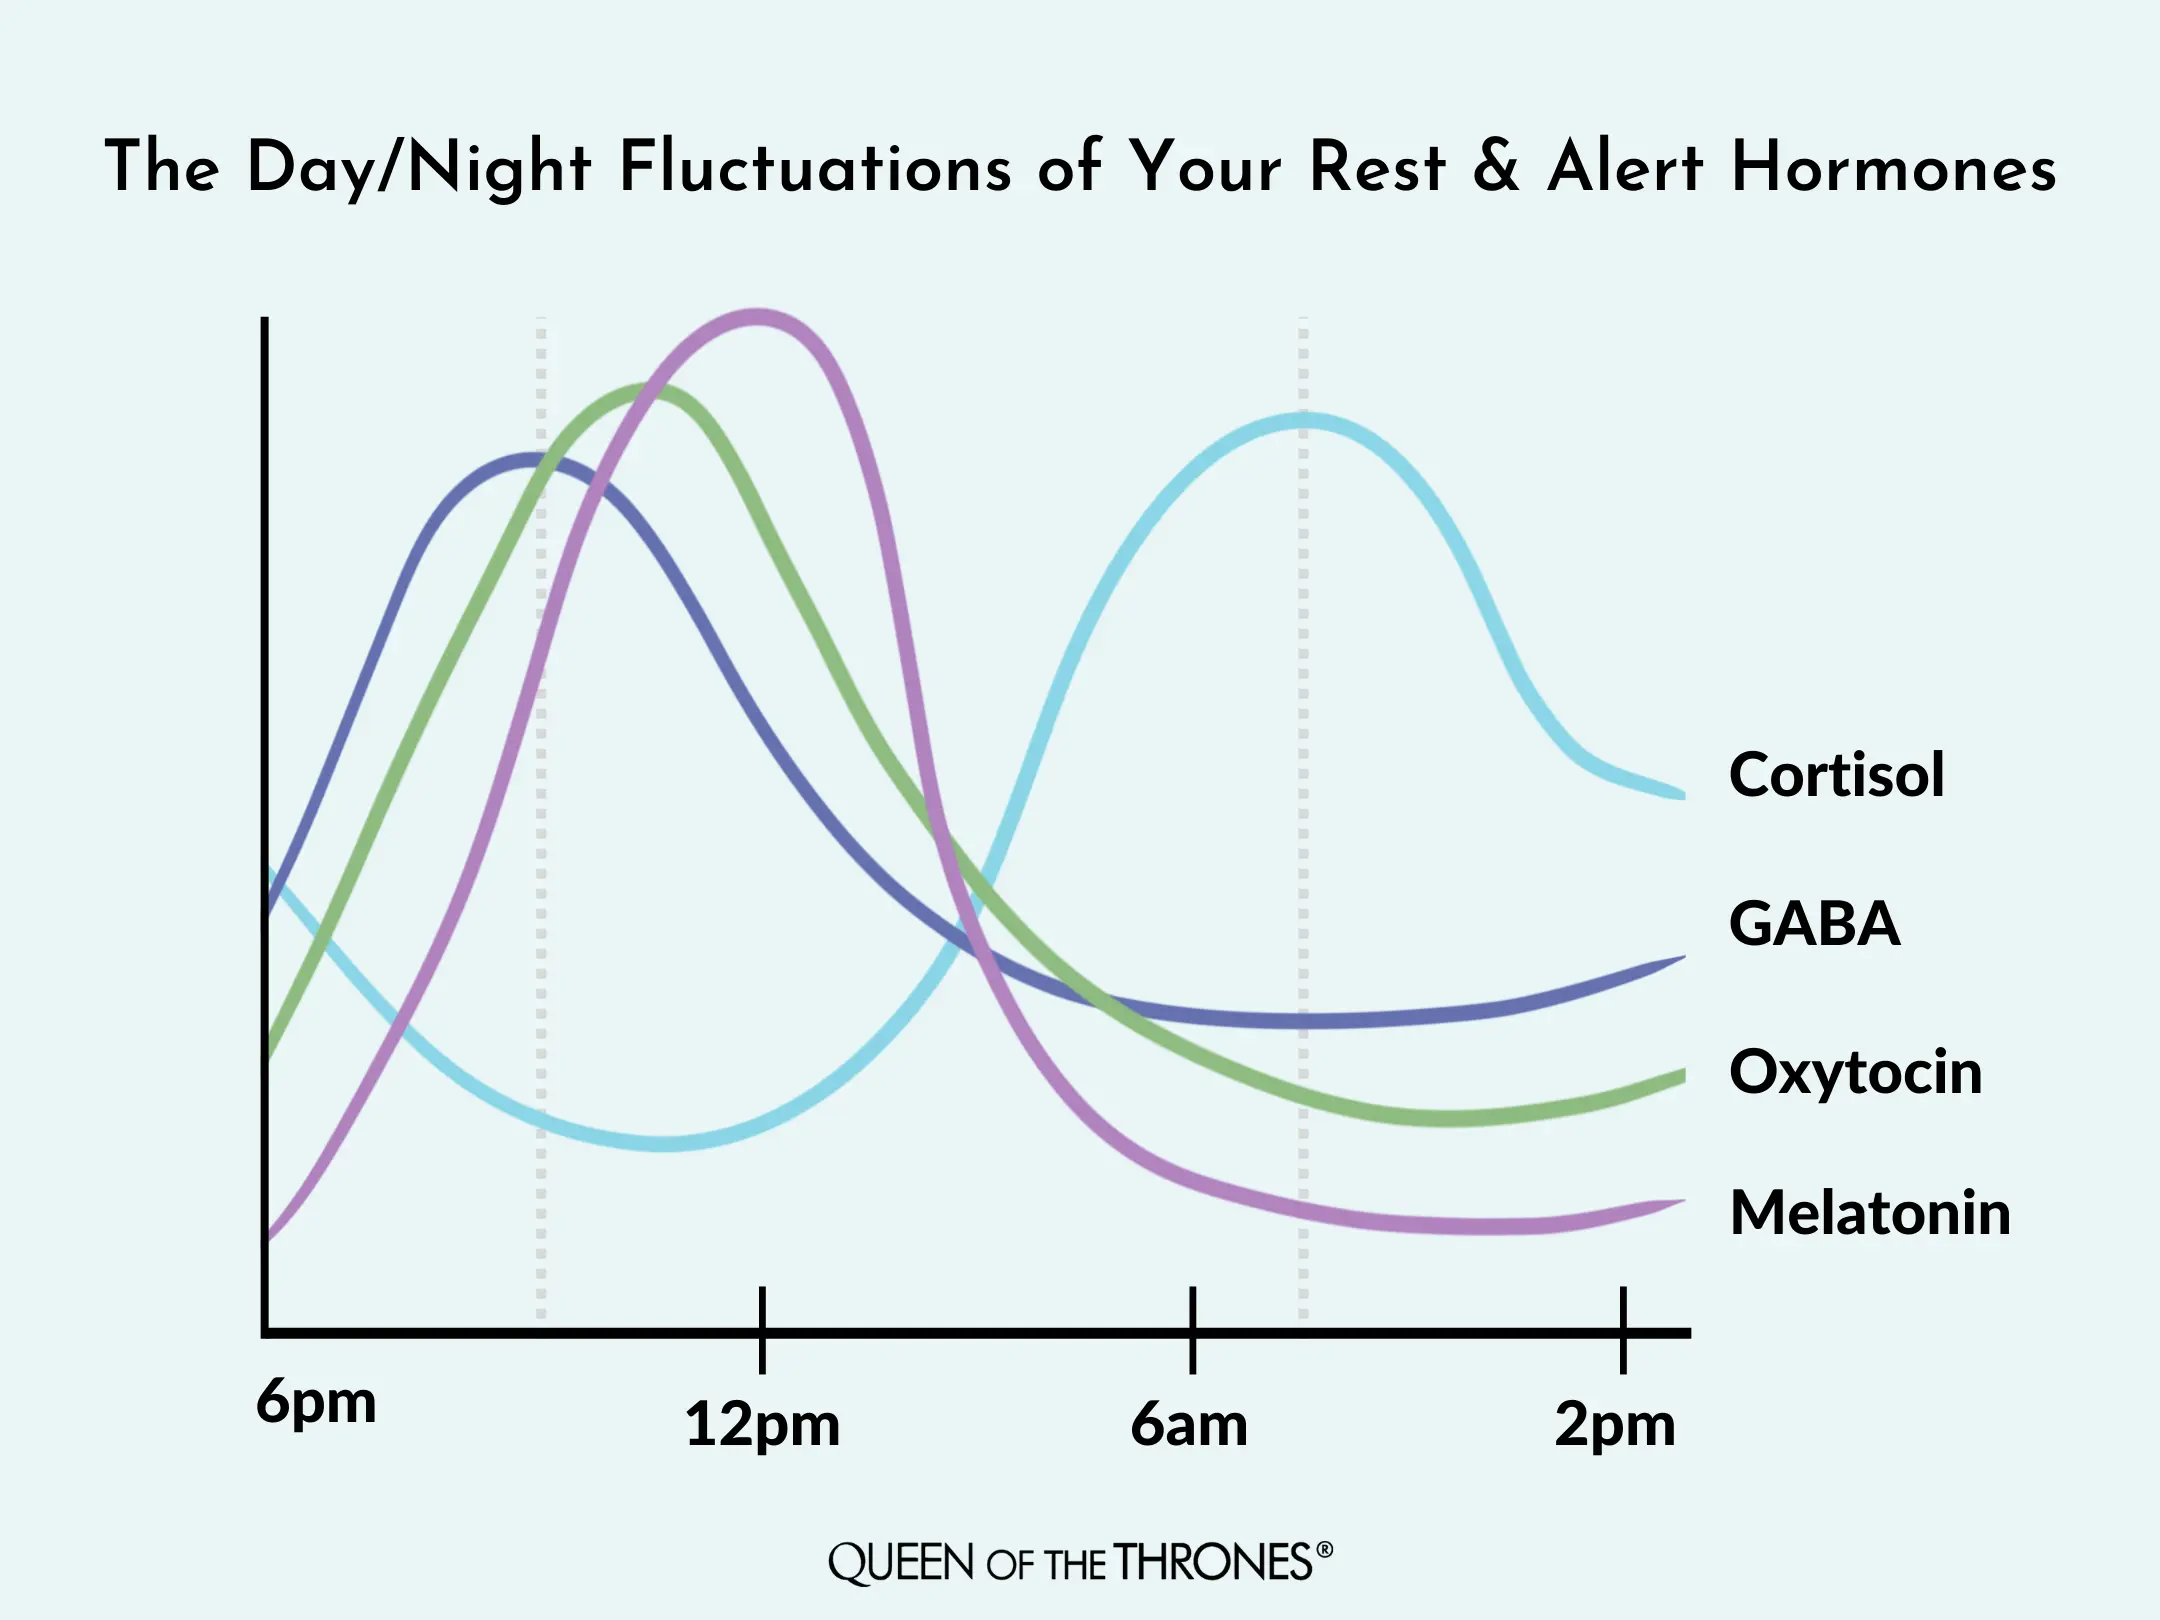 Day and Night Fluctuations of your Rest and Alert Hormones by Queen of the Thrones